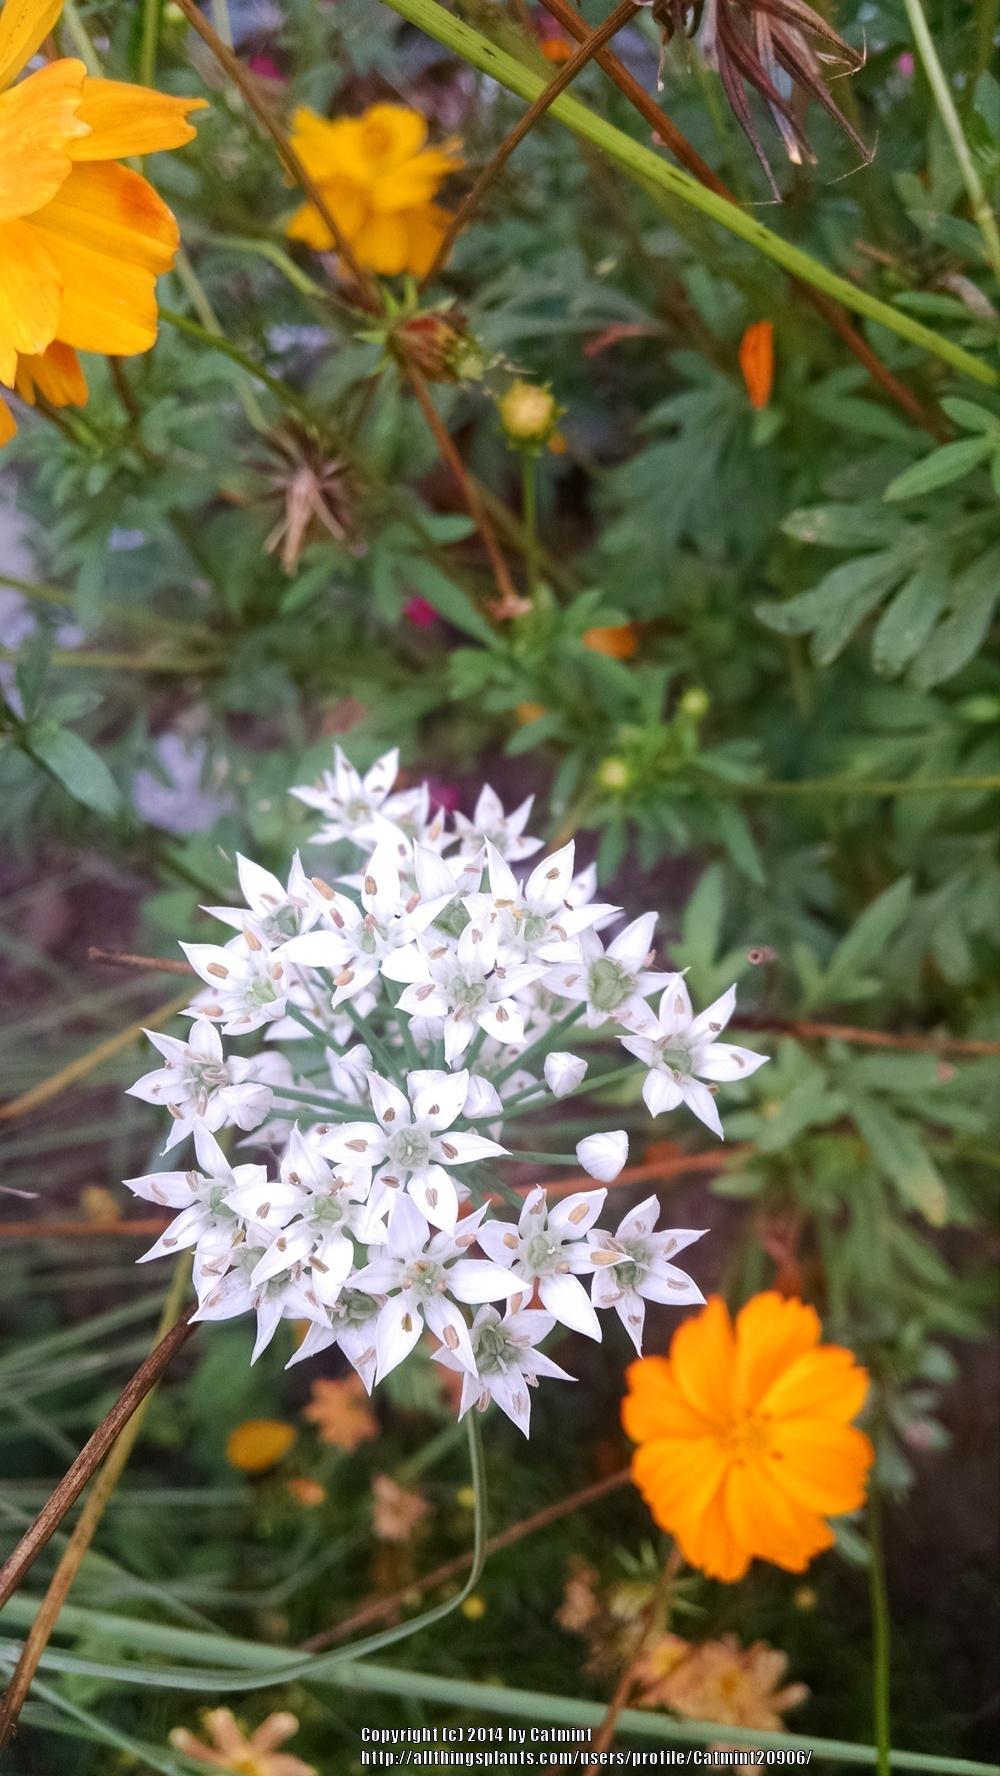 Photo of Garlic Chives (Allium tuberosum) uploaded by Catmint20906